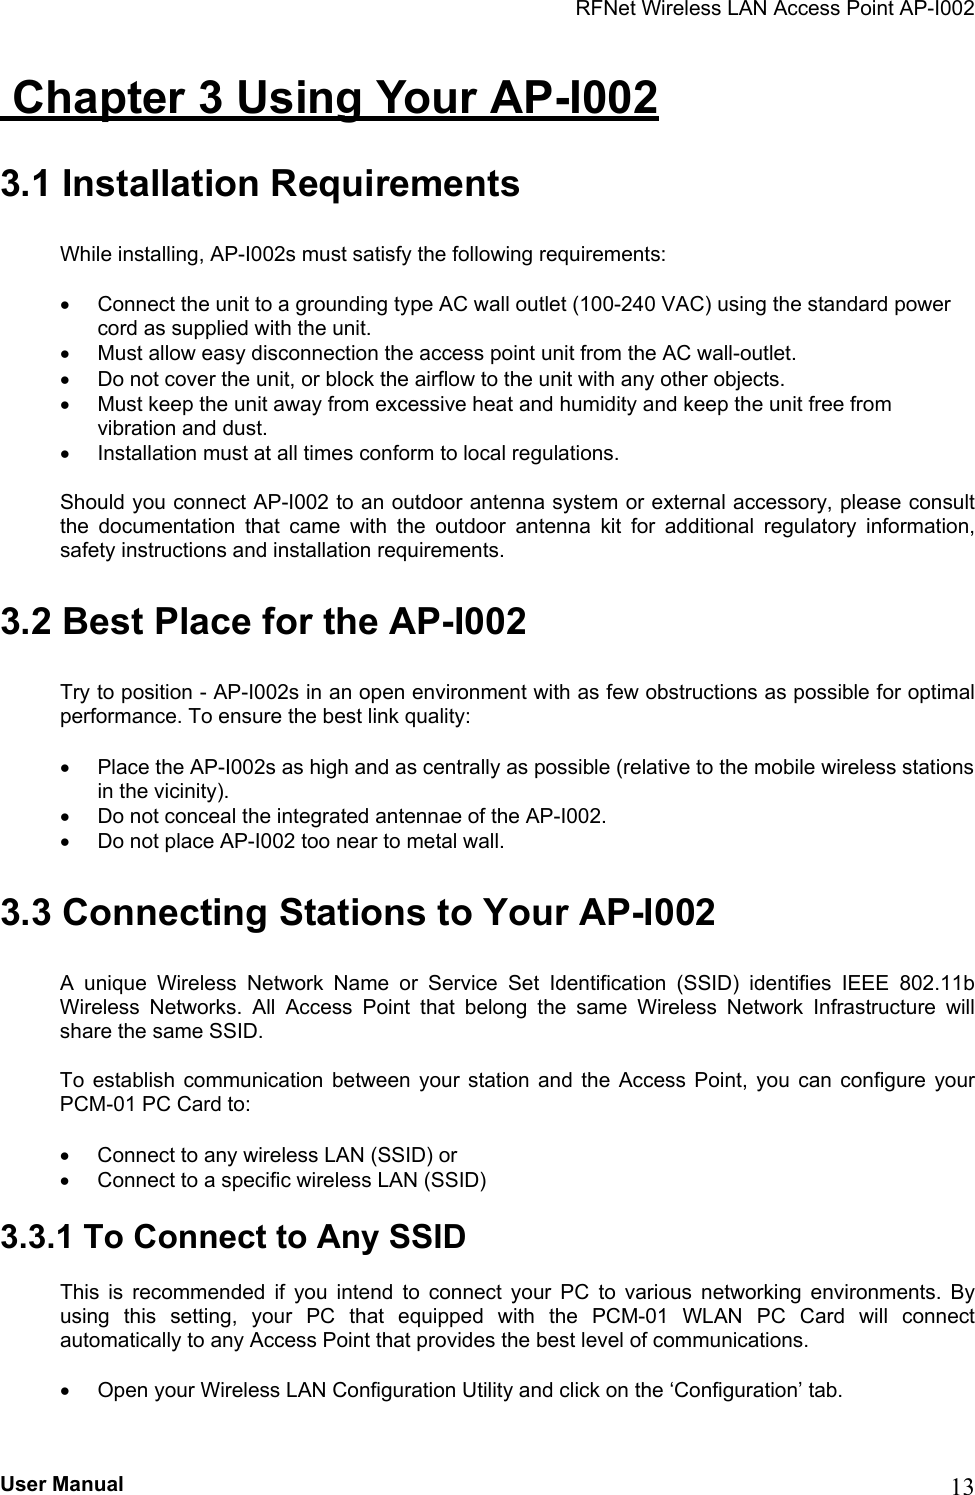 RFNet Wireless LAN Access Point AP-I002  Chapter 3 Using Your AP-I002 3.1 Installation Requirements While installing, AP-I002s must satisfy the following requirements:  •  Connect the unit to a grounding type AC wall outlet (100-240 VAC) using the standard power cord as supplied with the unit. •  Must allow easy disconnection the access point unit from the AC wall-outlet. •  Do not cover the unit, or block the airflow to the unit with any other objects.  •  Must keep the unit away from excessive heat and humidity and keep the unit free from vibration and dust. •  Installation must at all times conform to local regulations. Should you connect AP-I002 to an outdoor antenna system or external accessory, please consult the documentation that came with the outdoor antenna kit for additional regulatory information, safety instructions and installation requirements. 3.2 Best Place for the AP-I002 Try to position - AP-I002s in an open environment with as few obstructions as possible for optimal performance. To ensure the best link quality: •  Place the AP-I002s as high and as centrally as possible (relative to the mobile wireless stations in the vicinity). •  Do not conceal the integrated antennae of the AP-I002. •  Do not place AP-I002 too near to metal wall. 3.3 Connecting Stations to Your AP-I002 A unique Wireless Network Name or Service Set Identification (SSID) identifies IEEE 802.11b Wireless Networks. All Access Point that belong the same Wireless Network Infrastructure will share the same SSID. To establish communication between your station and the Access Point, you can configure your PCM-01 PC Card to: •  Connect to any wireless LAN (SSID) or  •  Connect to a specific wireless LAN (SSID) 3.3.1 To Connect to Any SSID This is recommended if you intend to connect your PC to various networking environments. By using this setting, your PC that equipped with the PCM-01 WLAN PC Card will connect automatically to any Access Point that provides the best level of communications. •  Open your Wireless LAN Configuration Utility and click on the ‘Configuration’ tab.  User Manual  13 